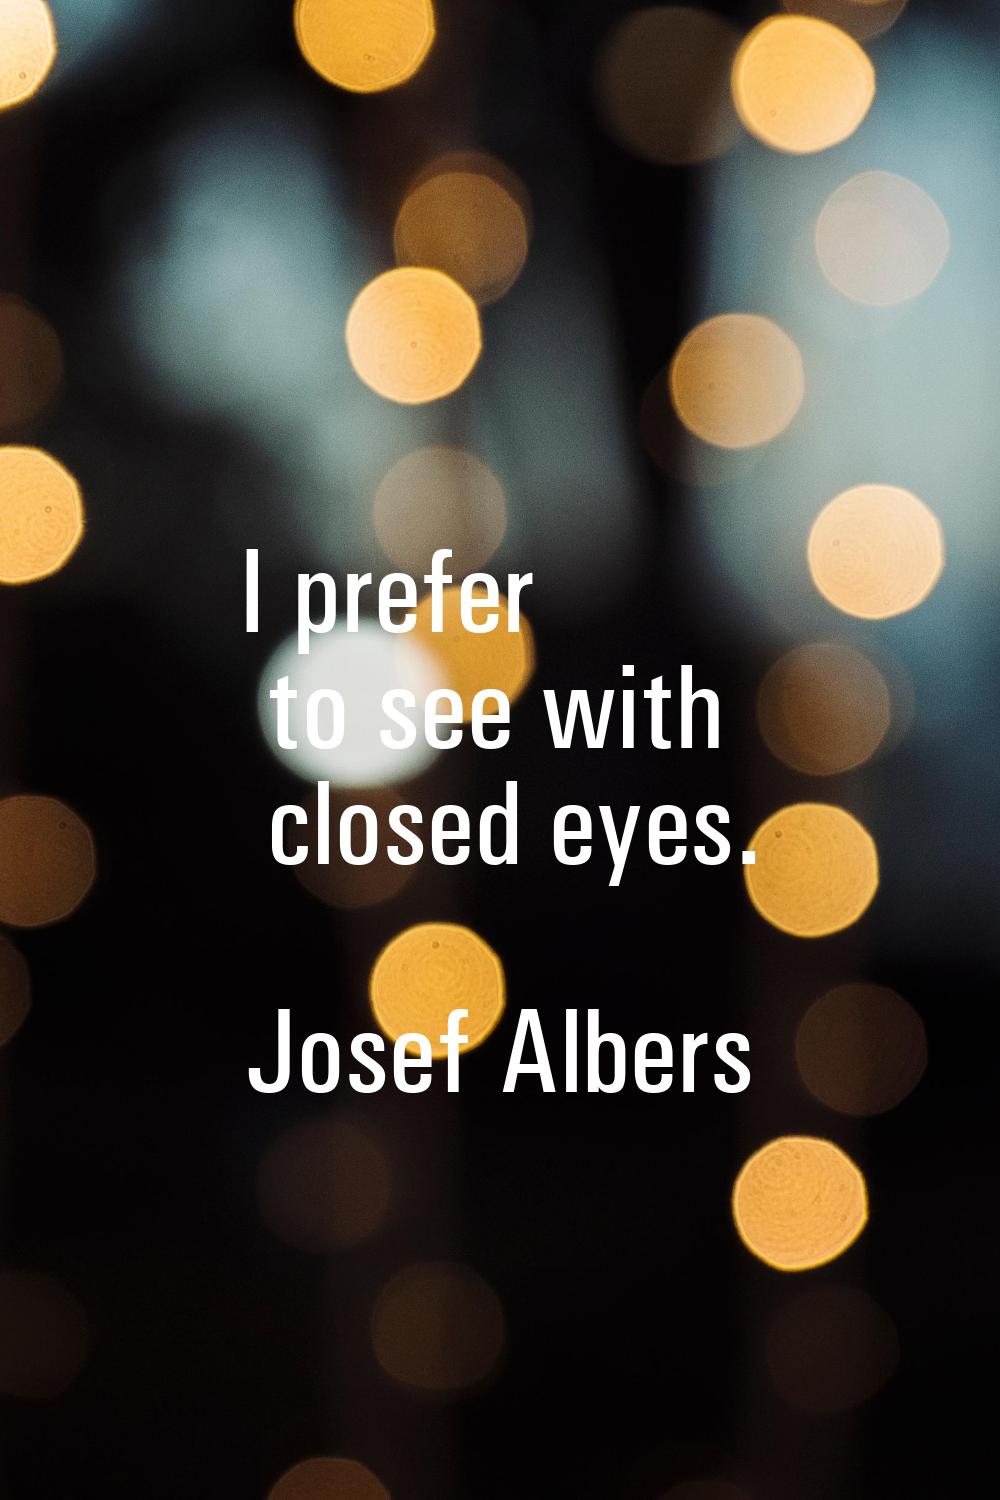 I prefer to see with closed eyes.